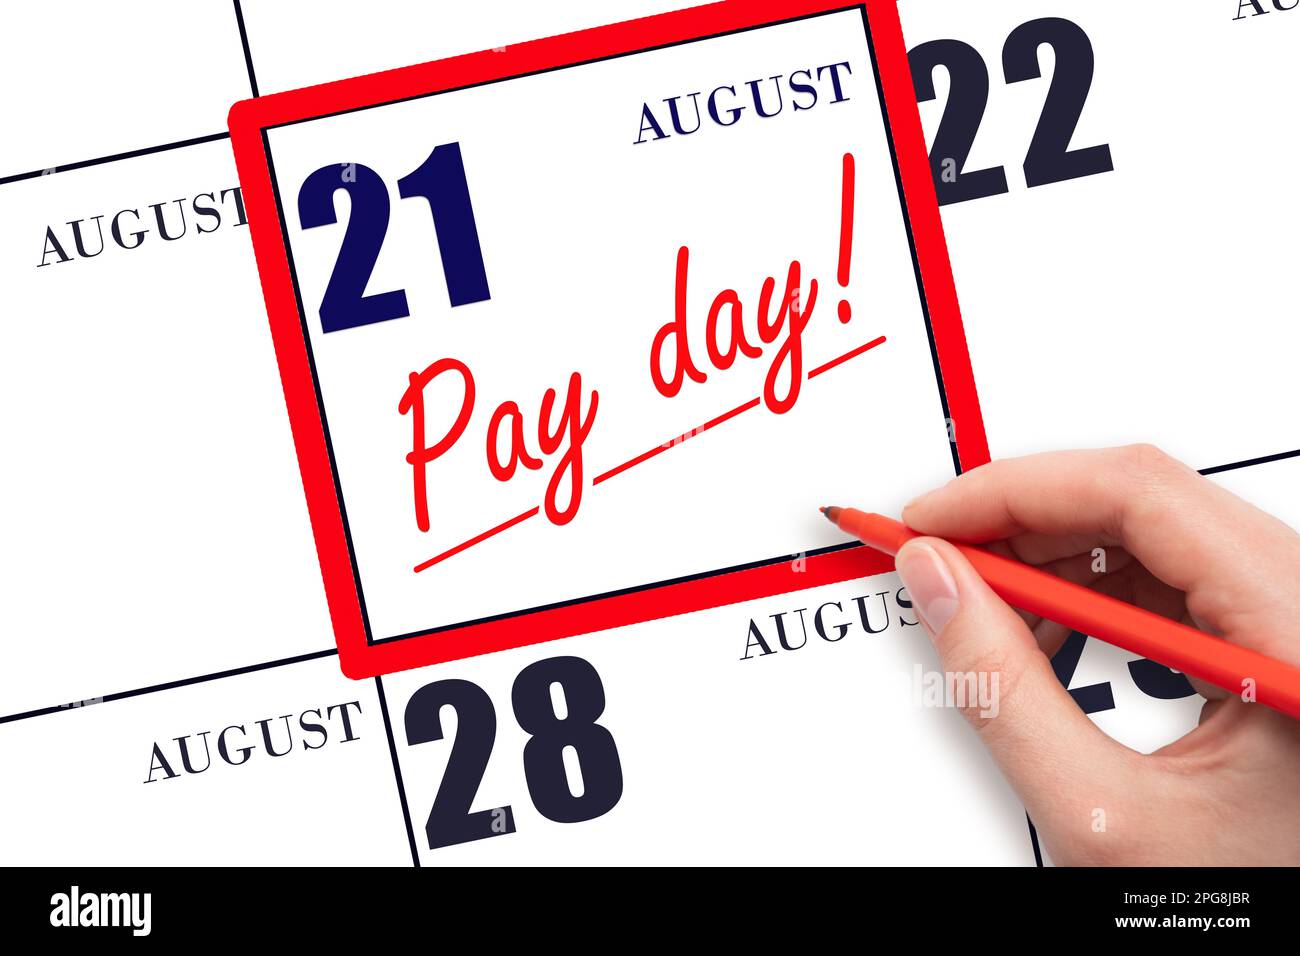 21st day of August. Hand writing text PAY DATE on calendar date August 21 and underline it. Payment due date. Reminder concept of payment. Summer mont Stock Photo